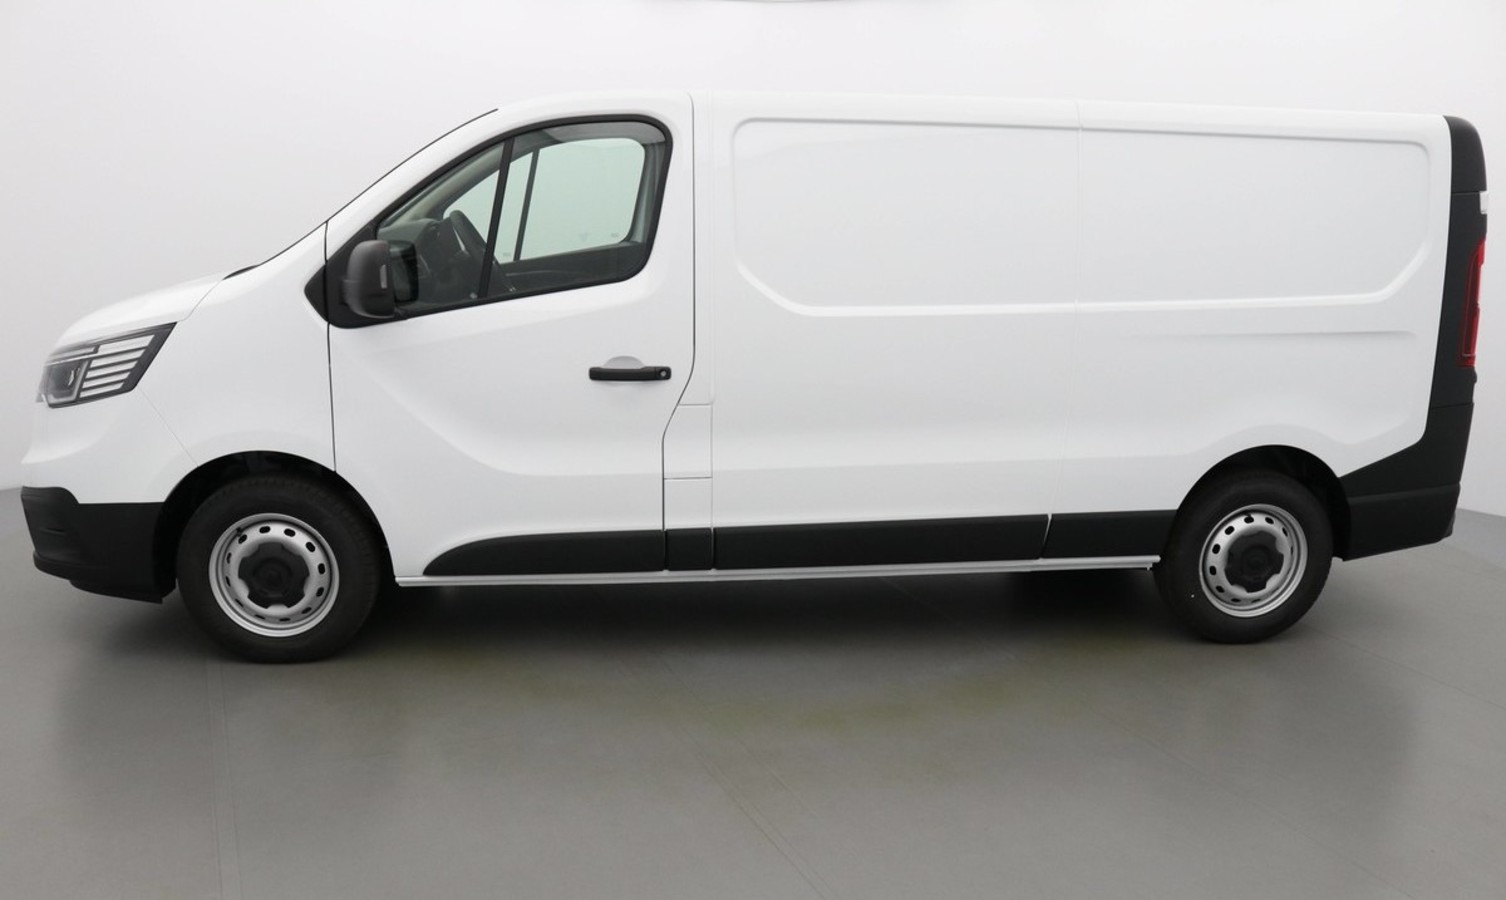 Annonce VU RENAULT TRAFIC 3 PHASE 3 FOURGON L2H1 CONFORT 130 BLUE